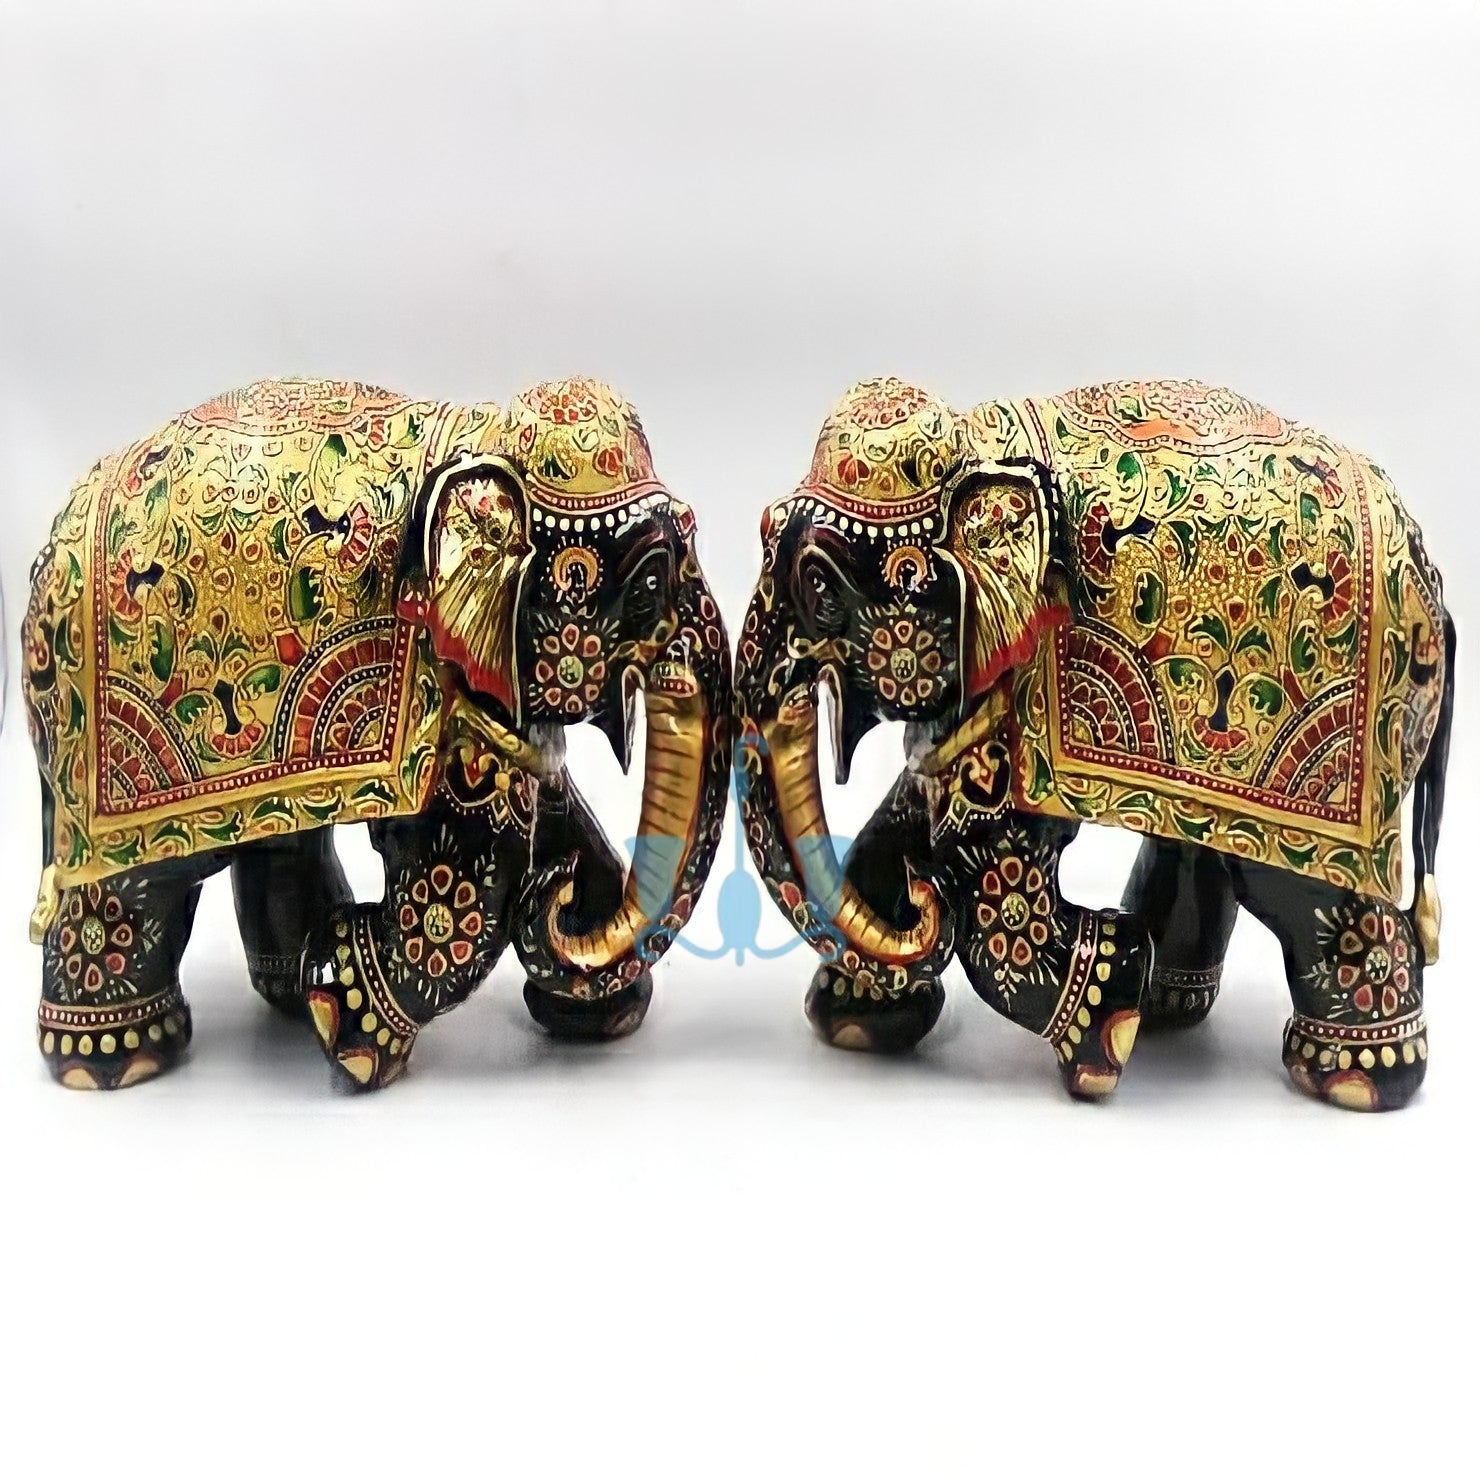 Black 2 Piece Fine Painted Wooden Elephant Figurines Of Size 7inch, available exclusively on Shahi Sajawat India, the world of home decor products. Best trendy home decor, living room, kitchen and bathroom decor ideas of 2022